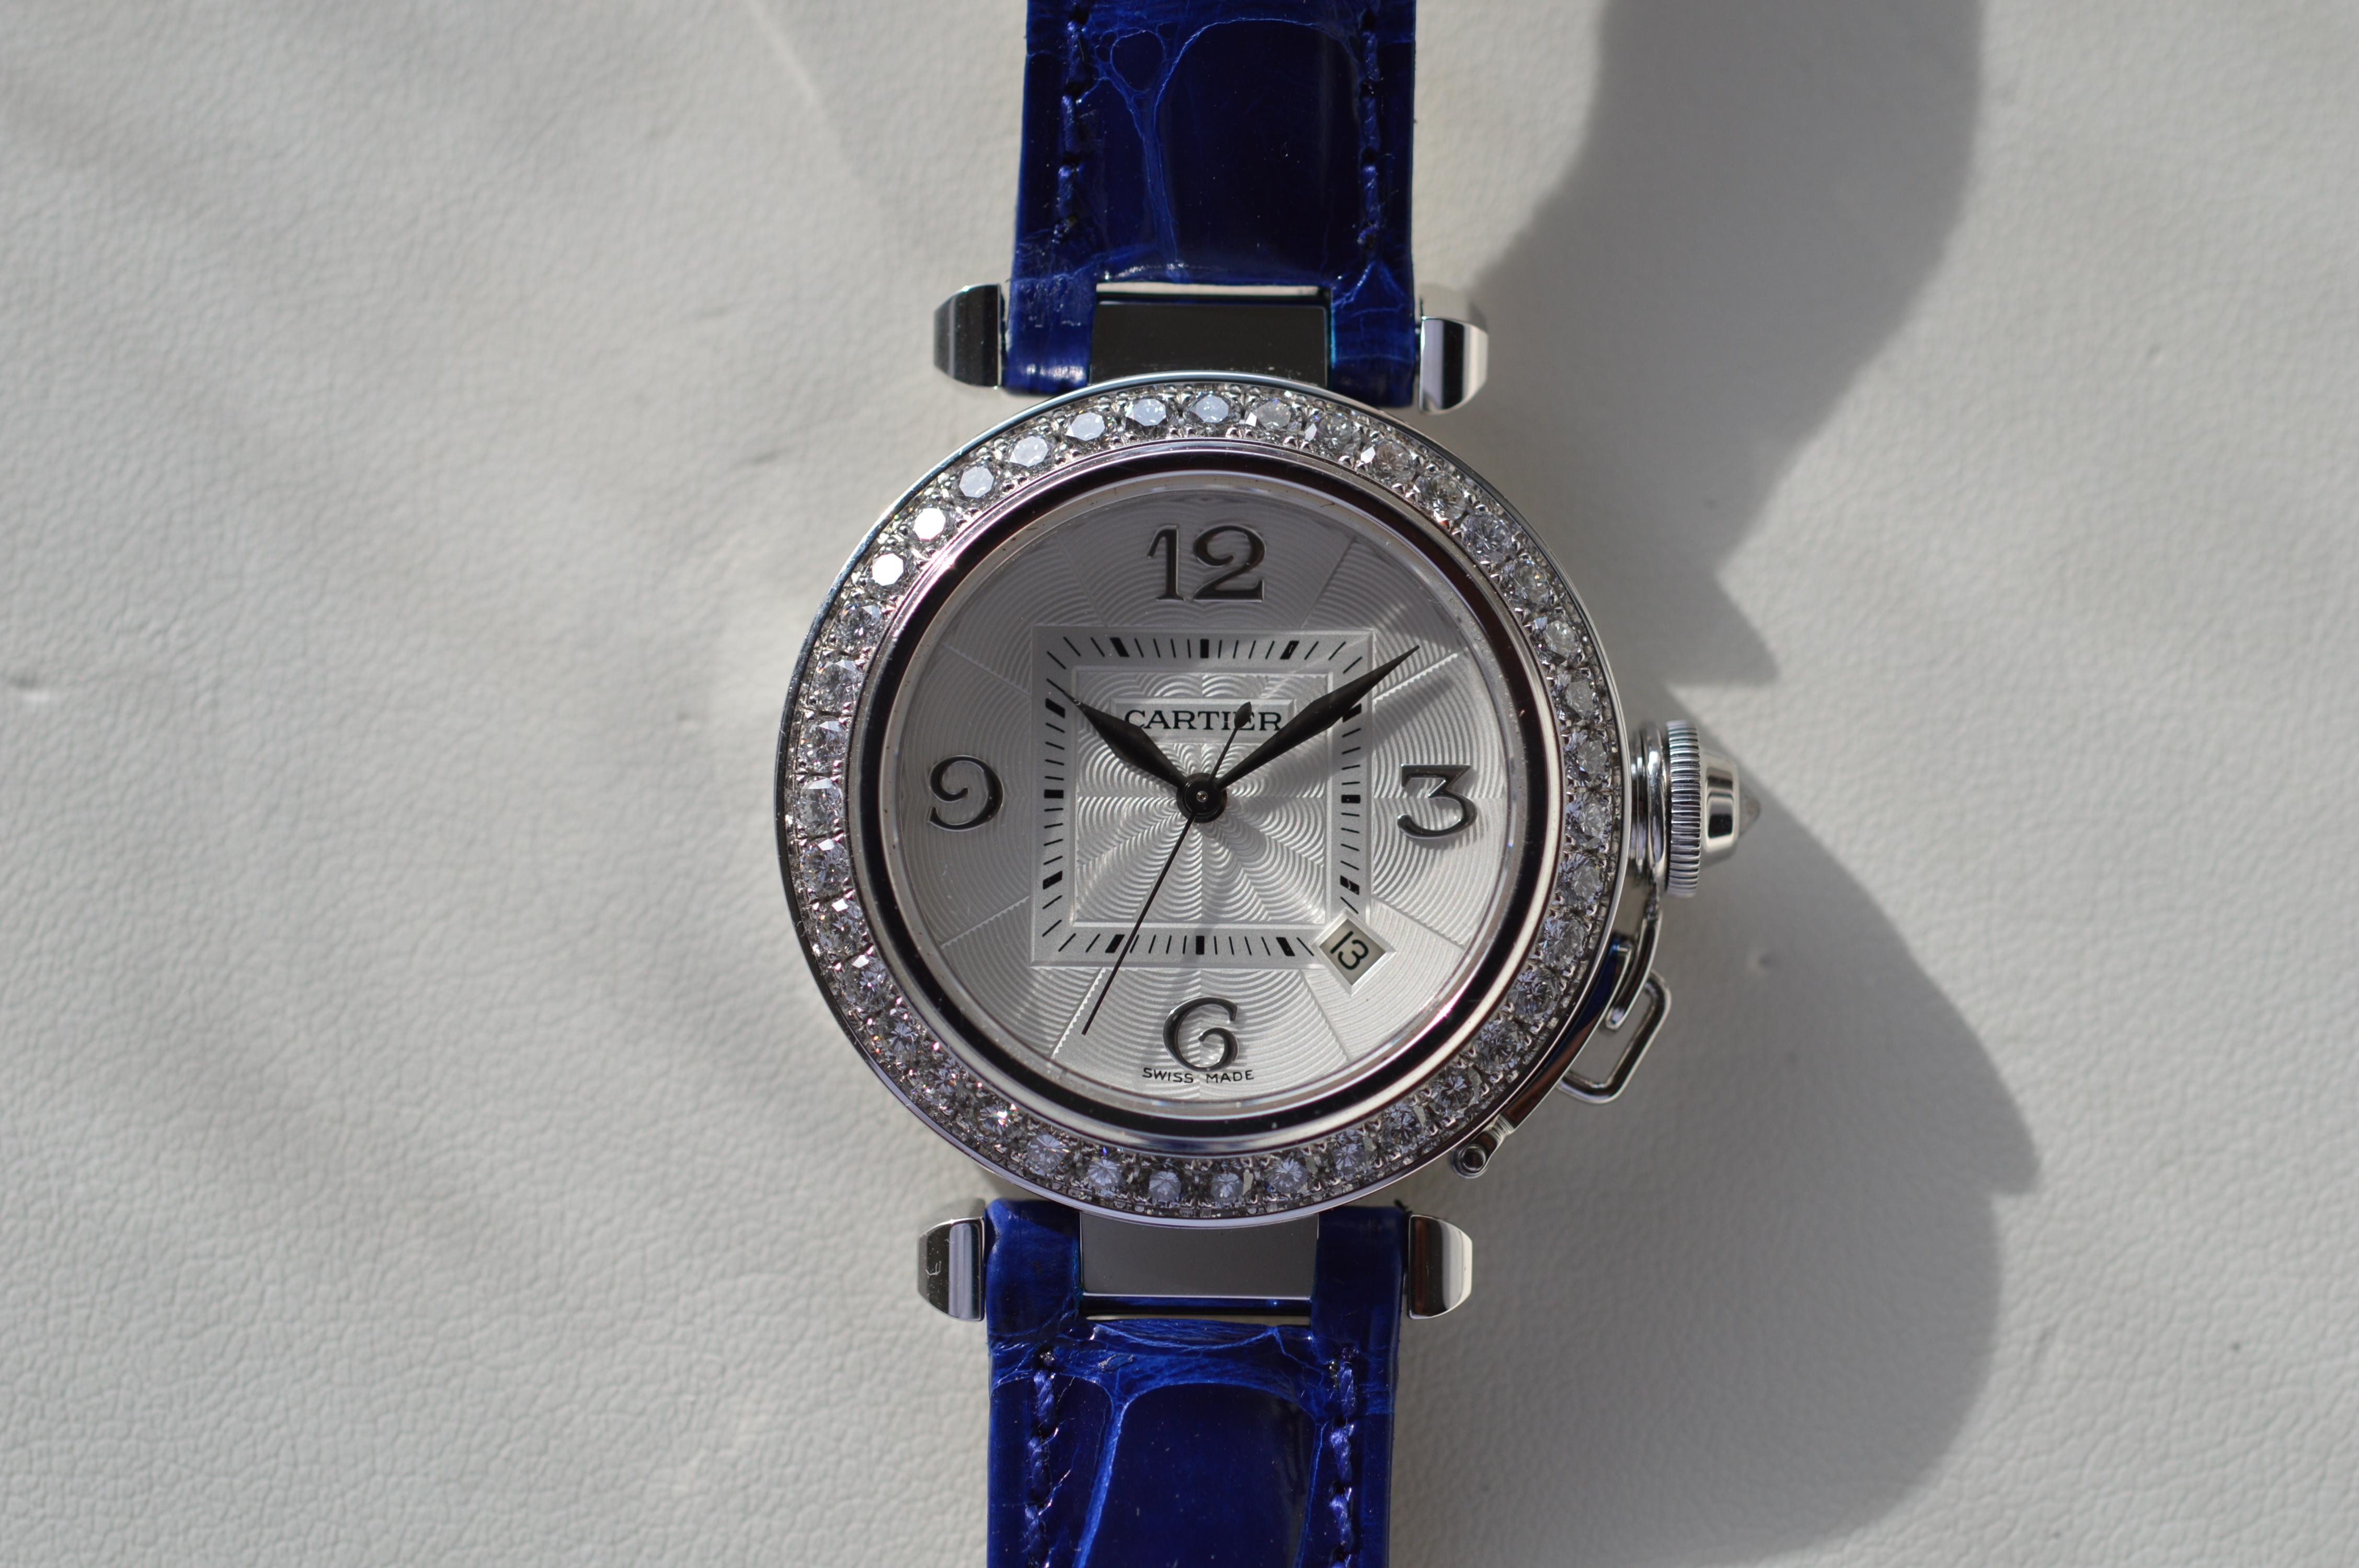 Cartier Pasha 32mm 18K White Gold on Leather Strap with Diamond Bezel and Crown
Reference n° WJ111631
32mm Size
18K White Gold Case
Blue Leather Strap
Diamond Crown
Guilloché Dial
Water-Resistant
Automatic Movement
Open Back Case
Diamond Bezel
40